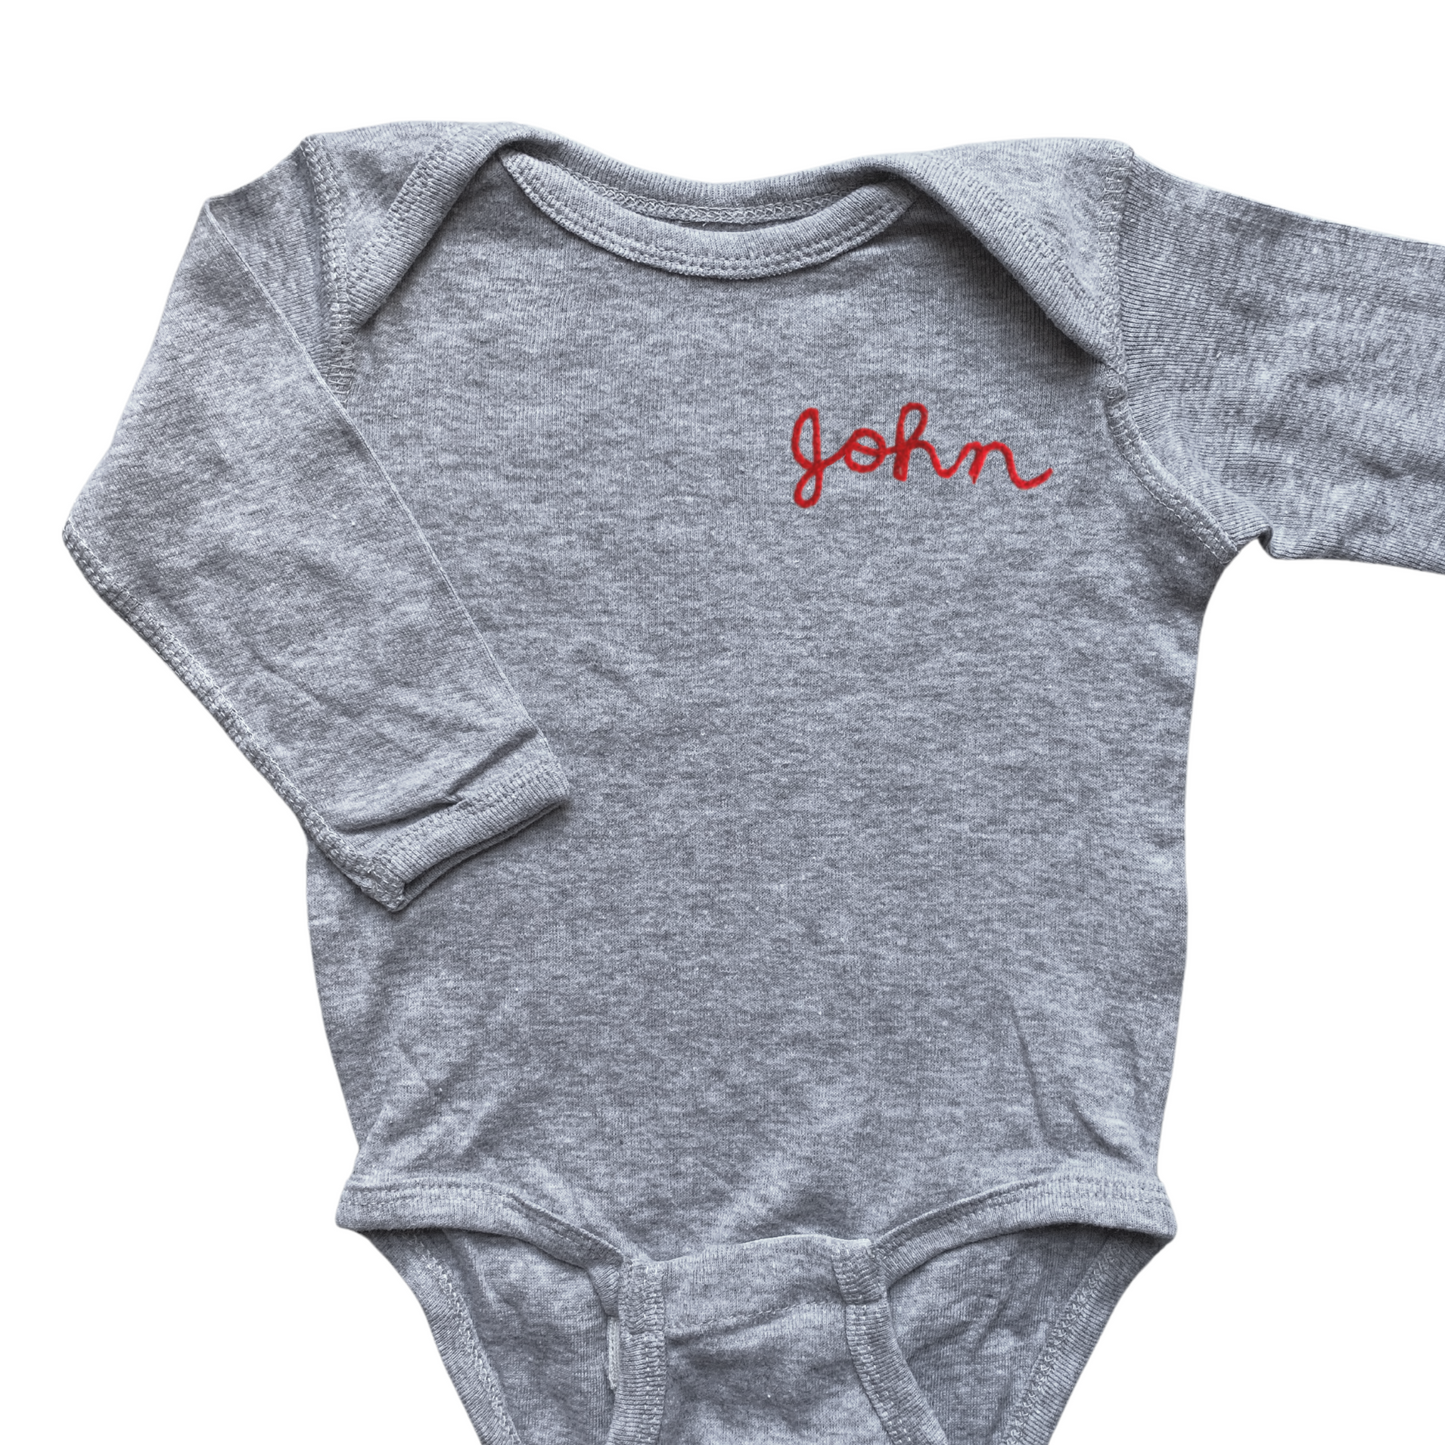 The Long Sleeve Chainstitch Baby Onesie - Gray